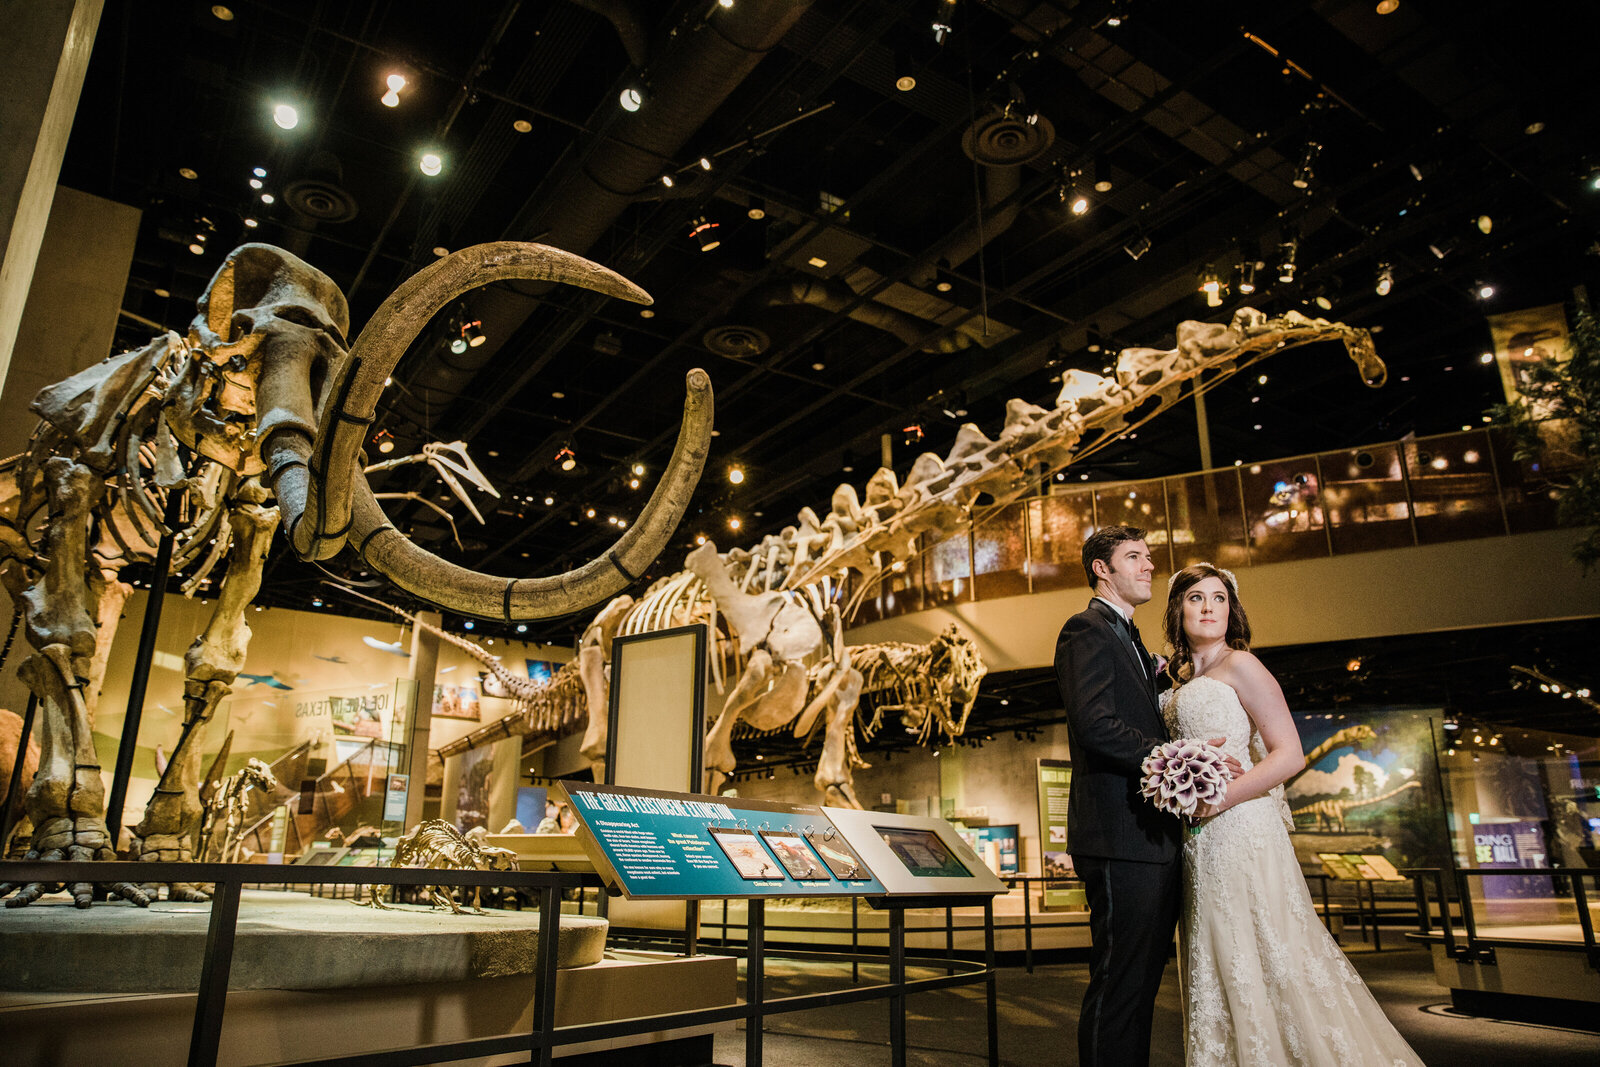 A couple stands in front of two giant dinosaur skeletons at the Perot Museum in Dallas Texas. They are looking off in the distance.